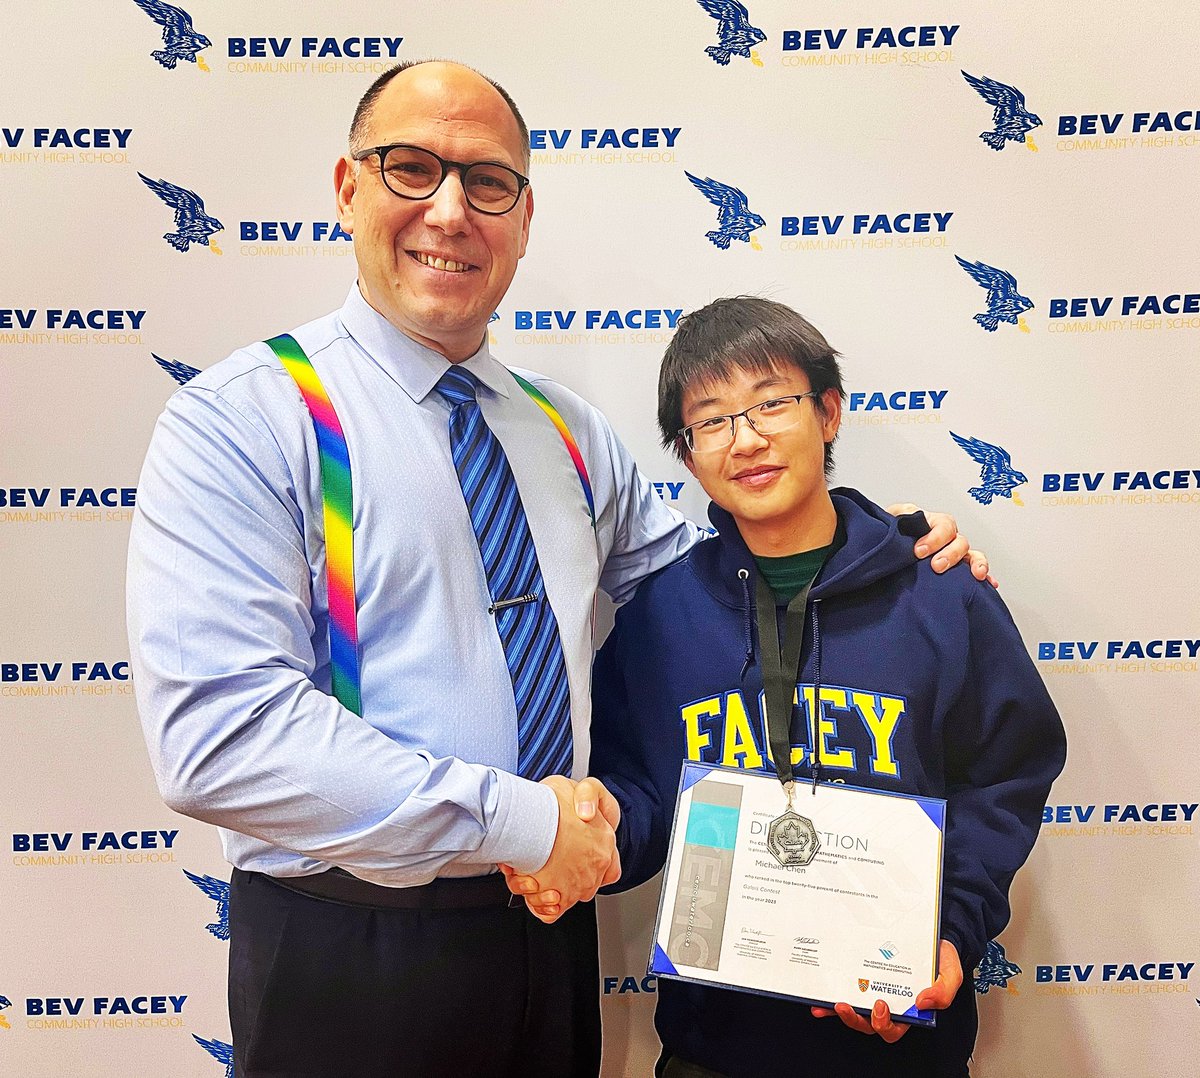 Congratulations to our very own Michael Chen for scoring in the top 25th percentile of the Galois Math Competition which earned him a certificate of distinction and the school champion medal.  Well done, Michael!!  
.
.
#trueblue #thefaceyway #eips